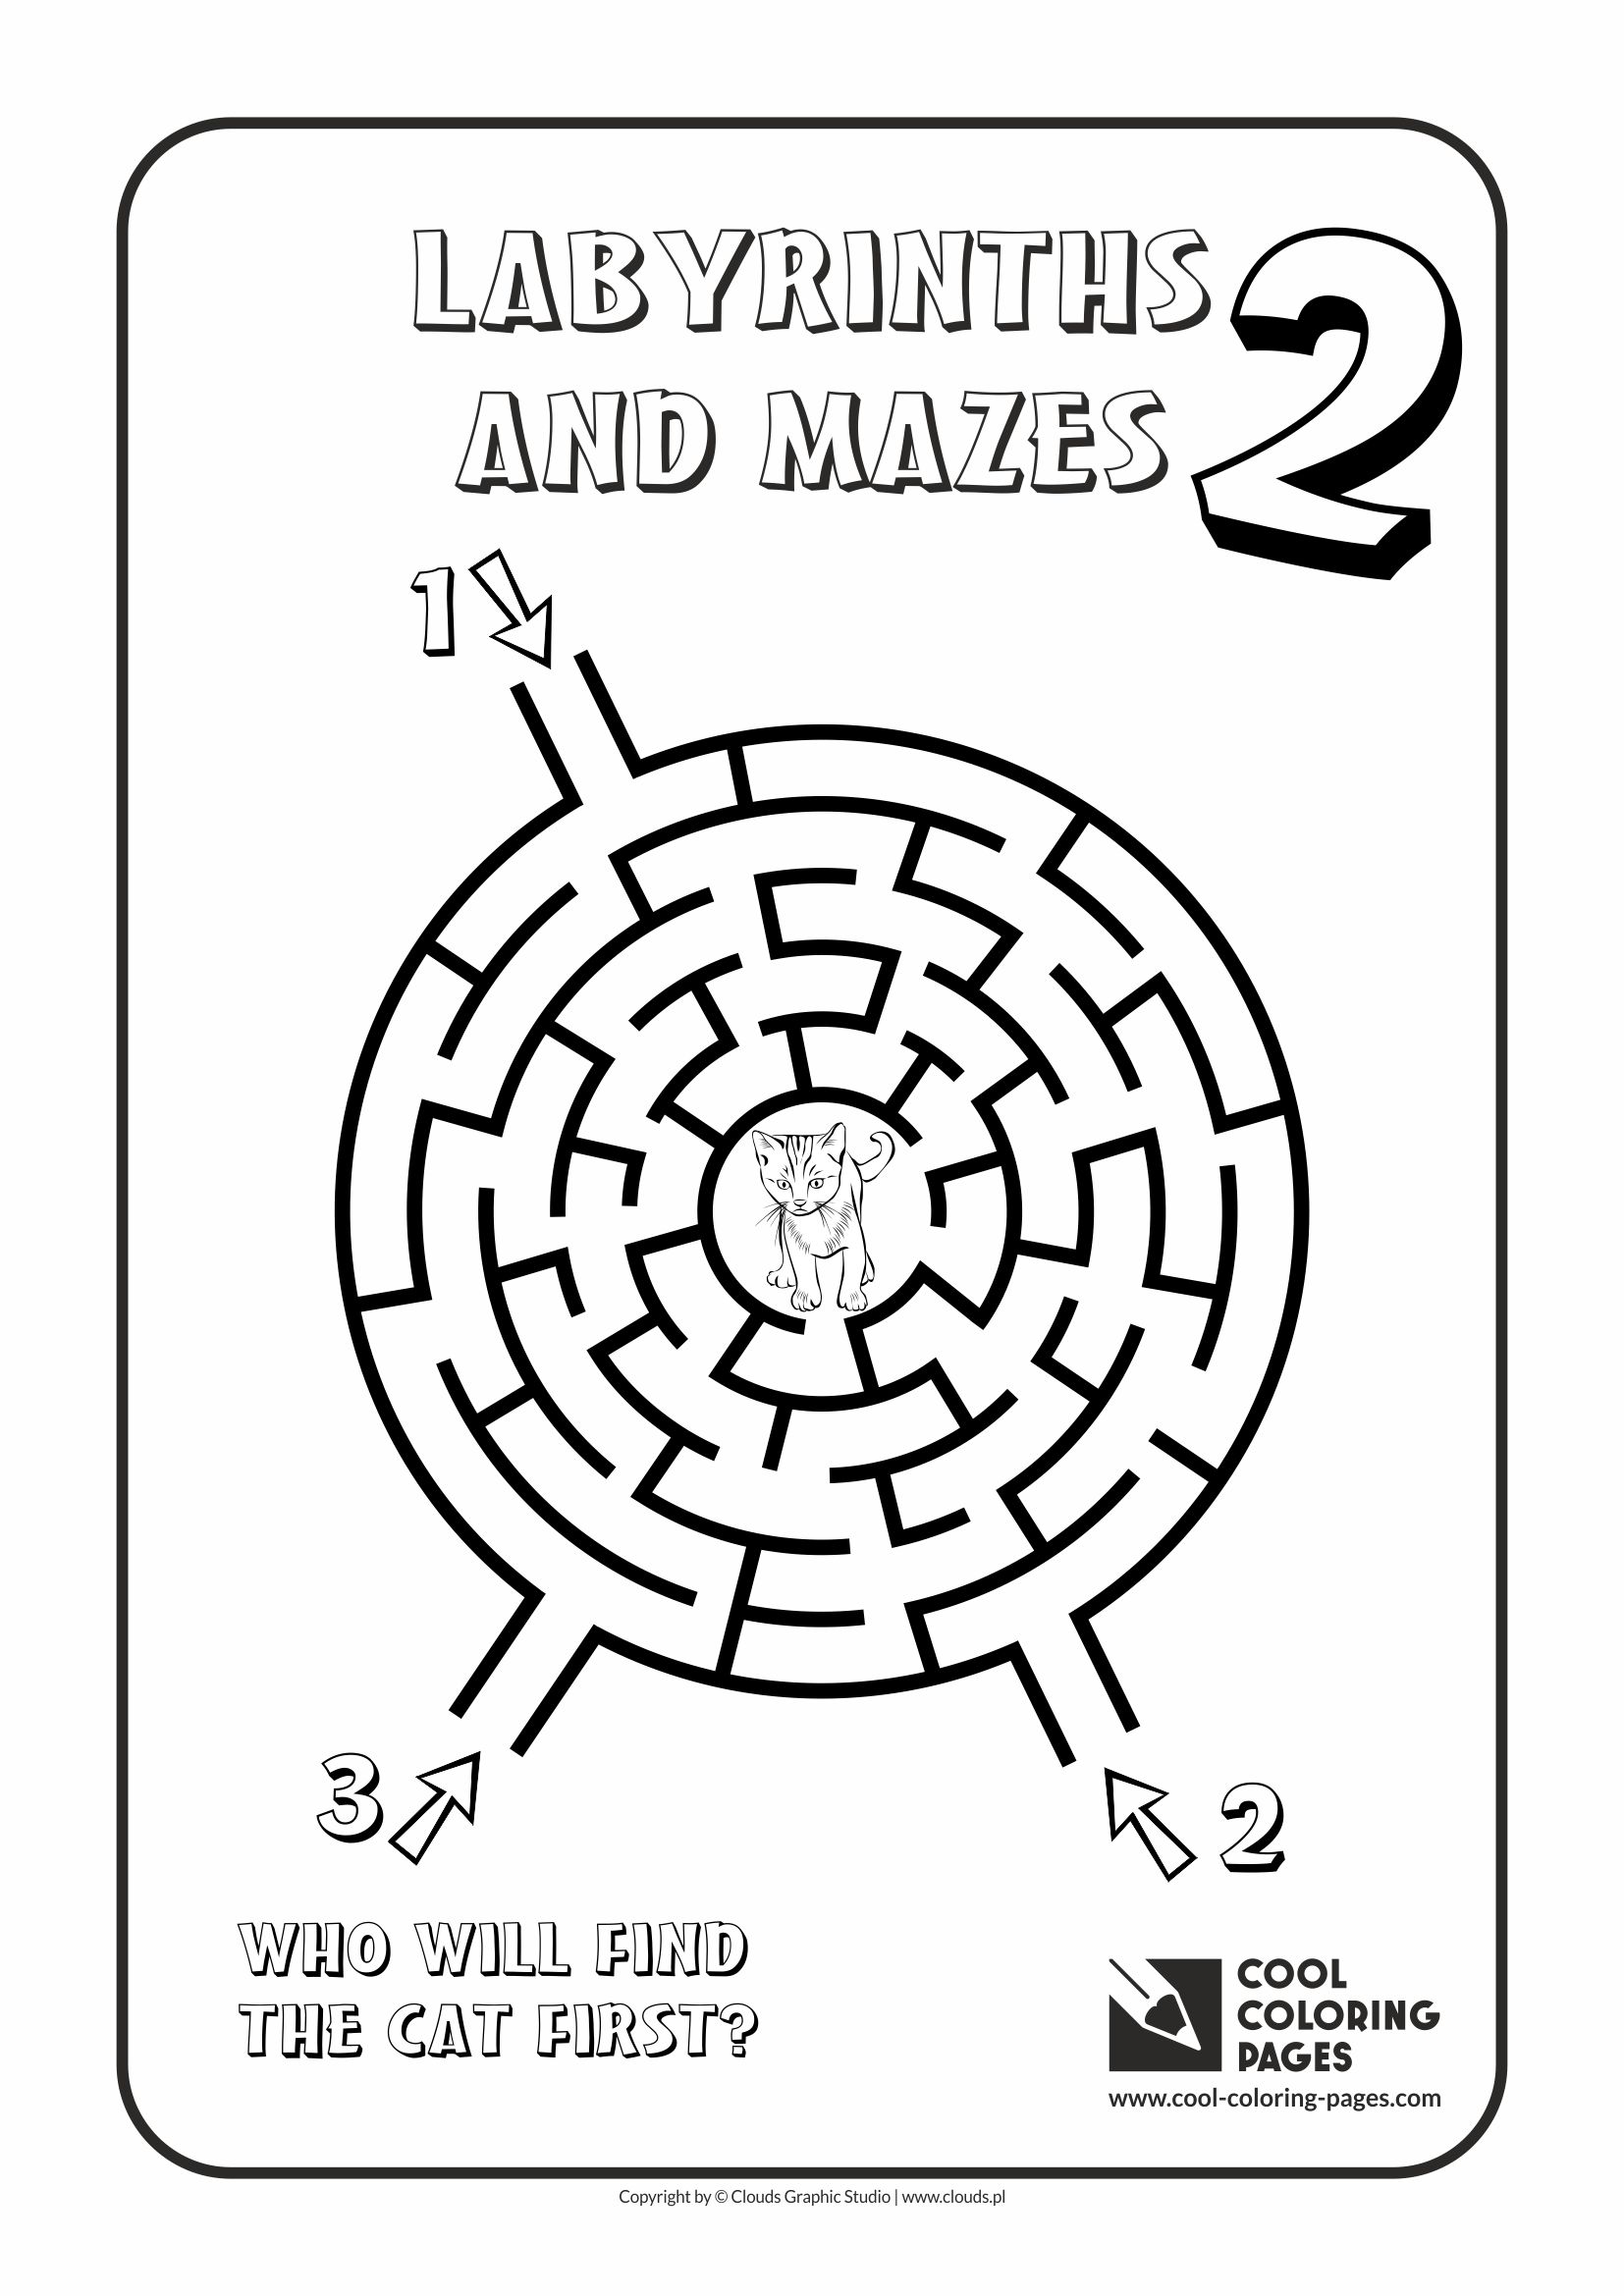 Cool Coloring Pages - Labyrinths and mazes / Maze no 2